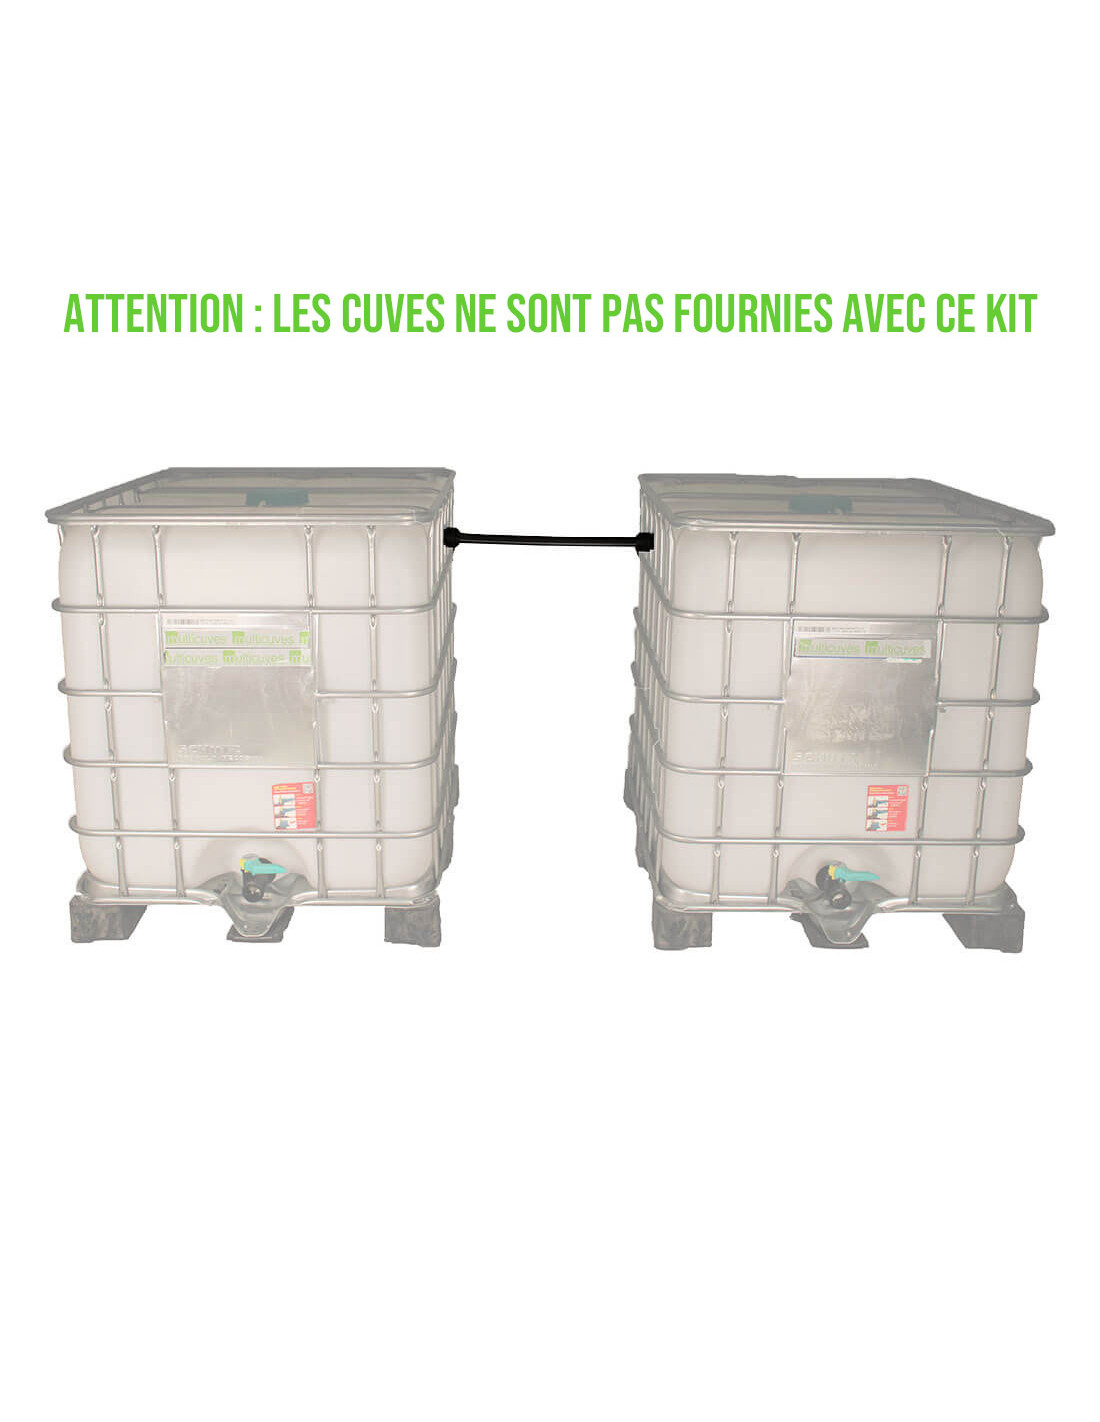 Raccords, Adapteurs, Couplage IBC, GRV, Cuve 1000 litres